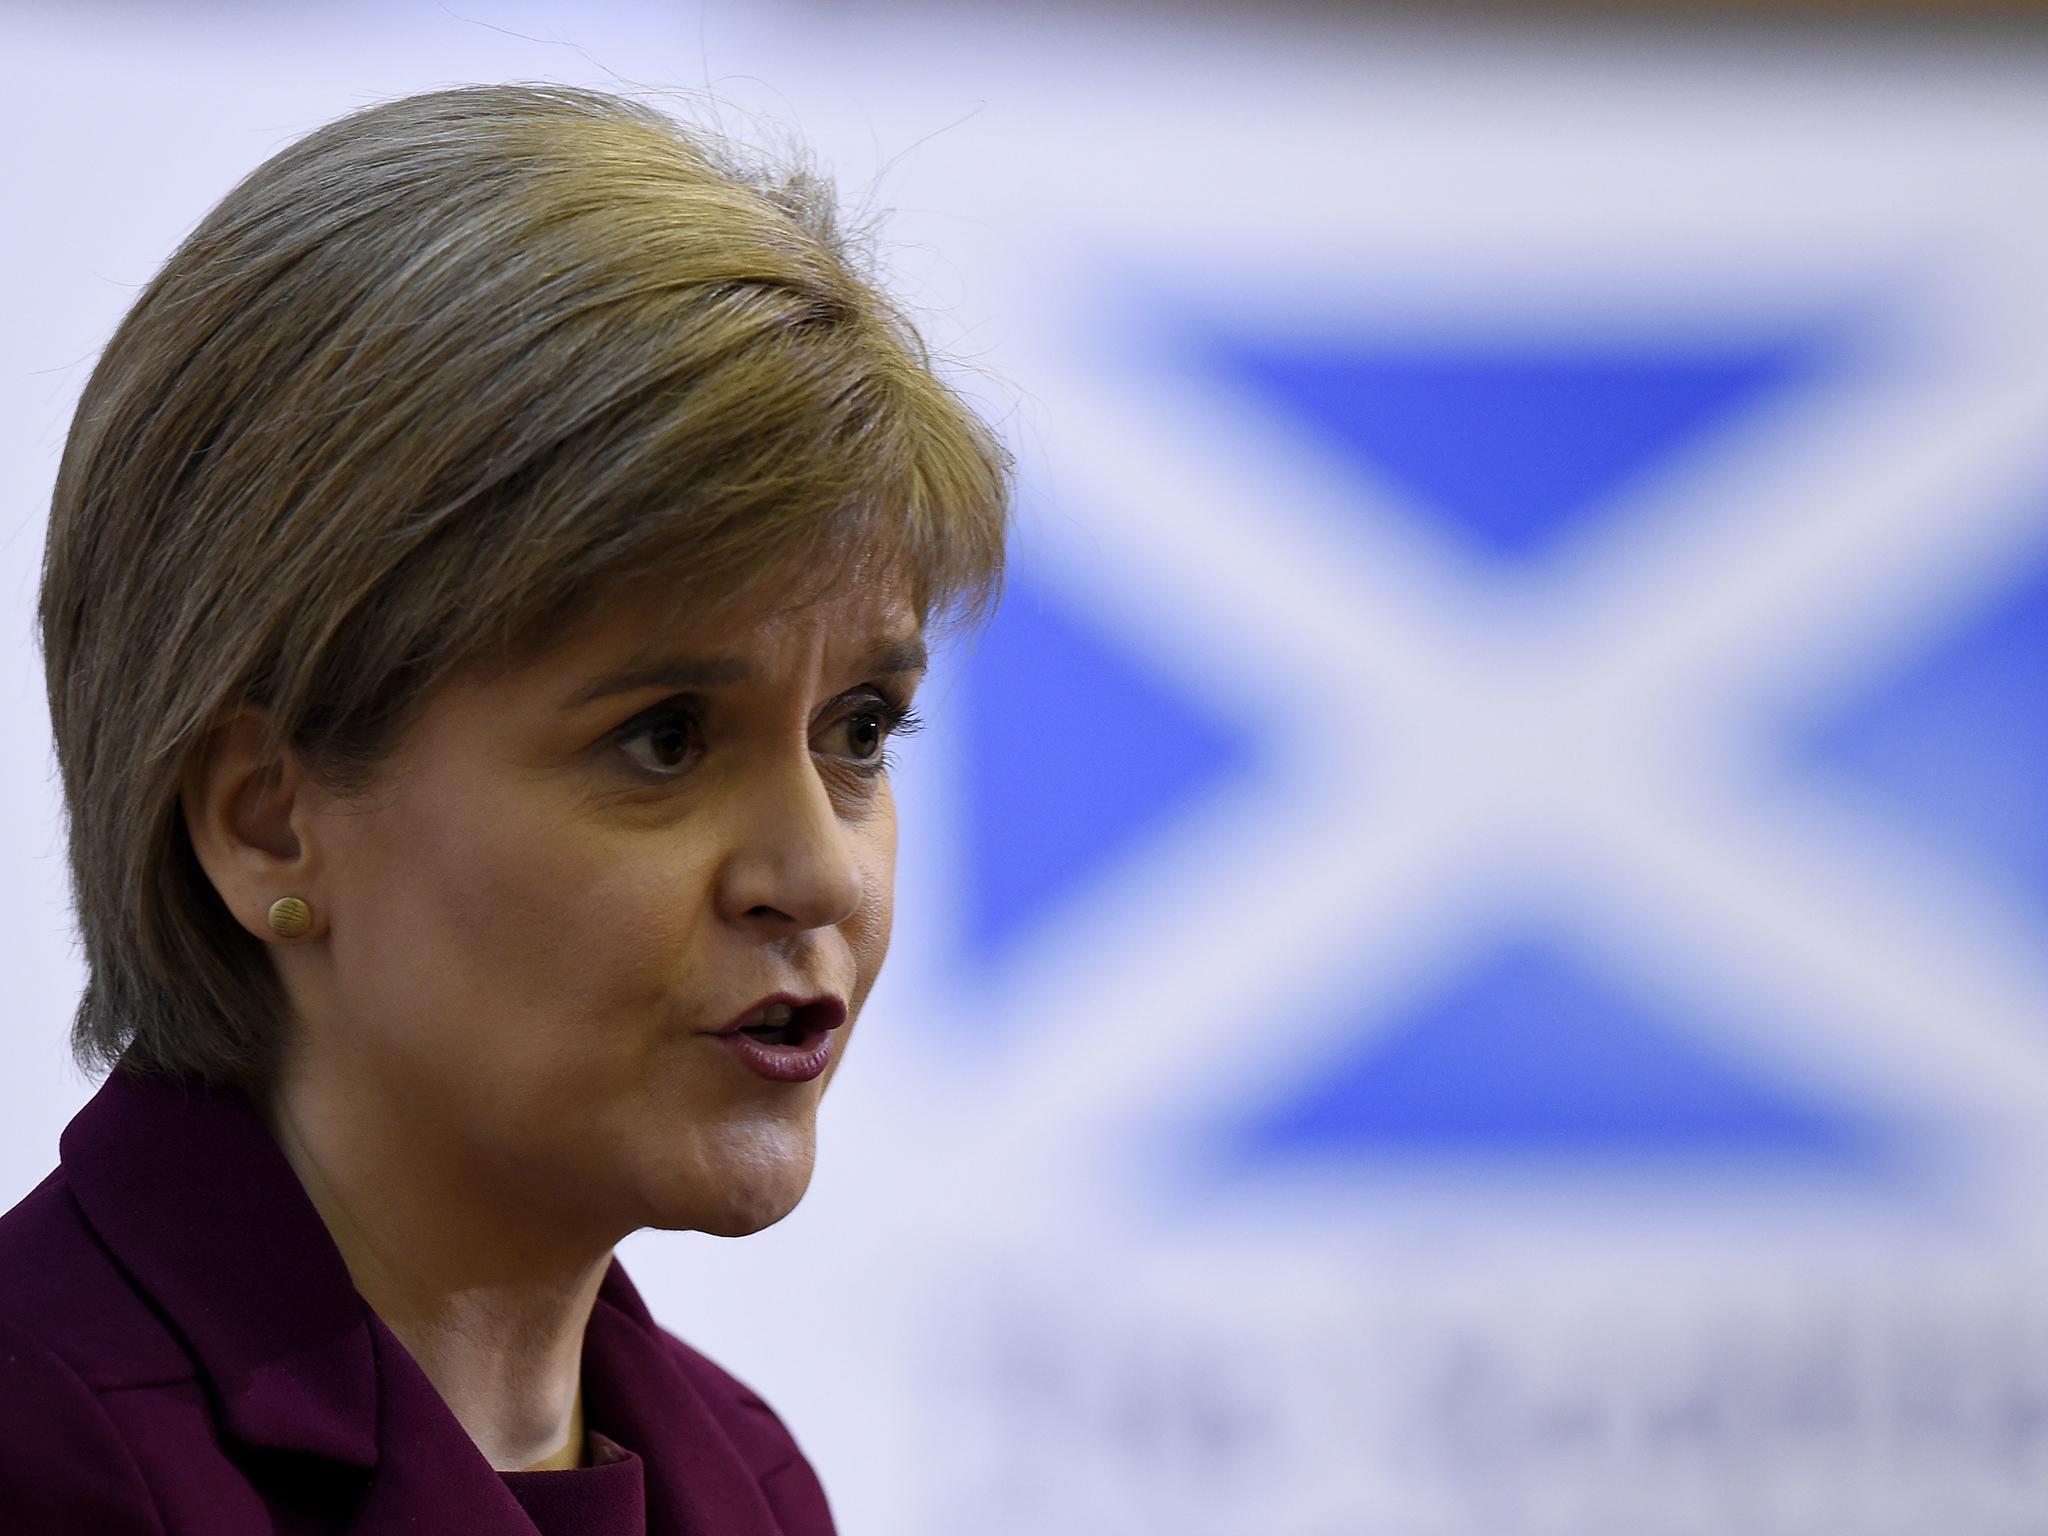 Sturgeon’s biographer revealed that she had a miscarriage while she was deputy first minister